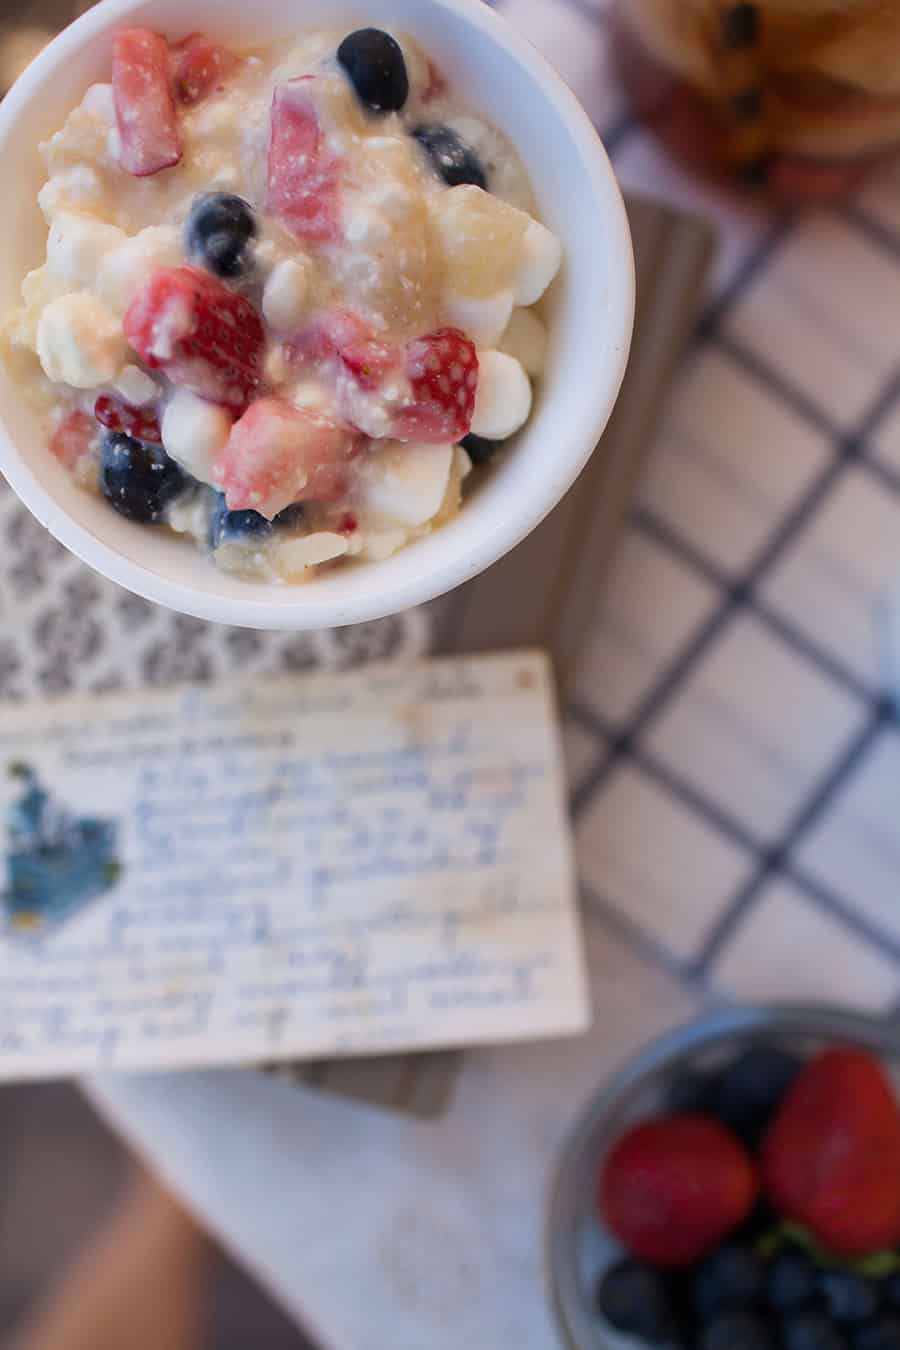 A bowl of berries and a note on a table, with red, white, and blue Watergate salad.